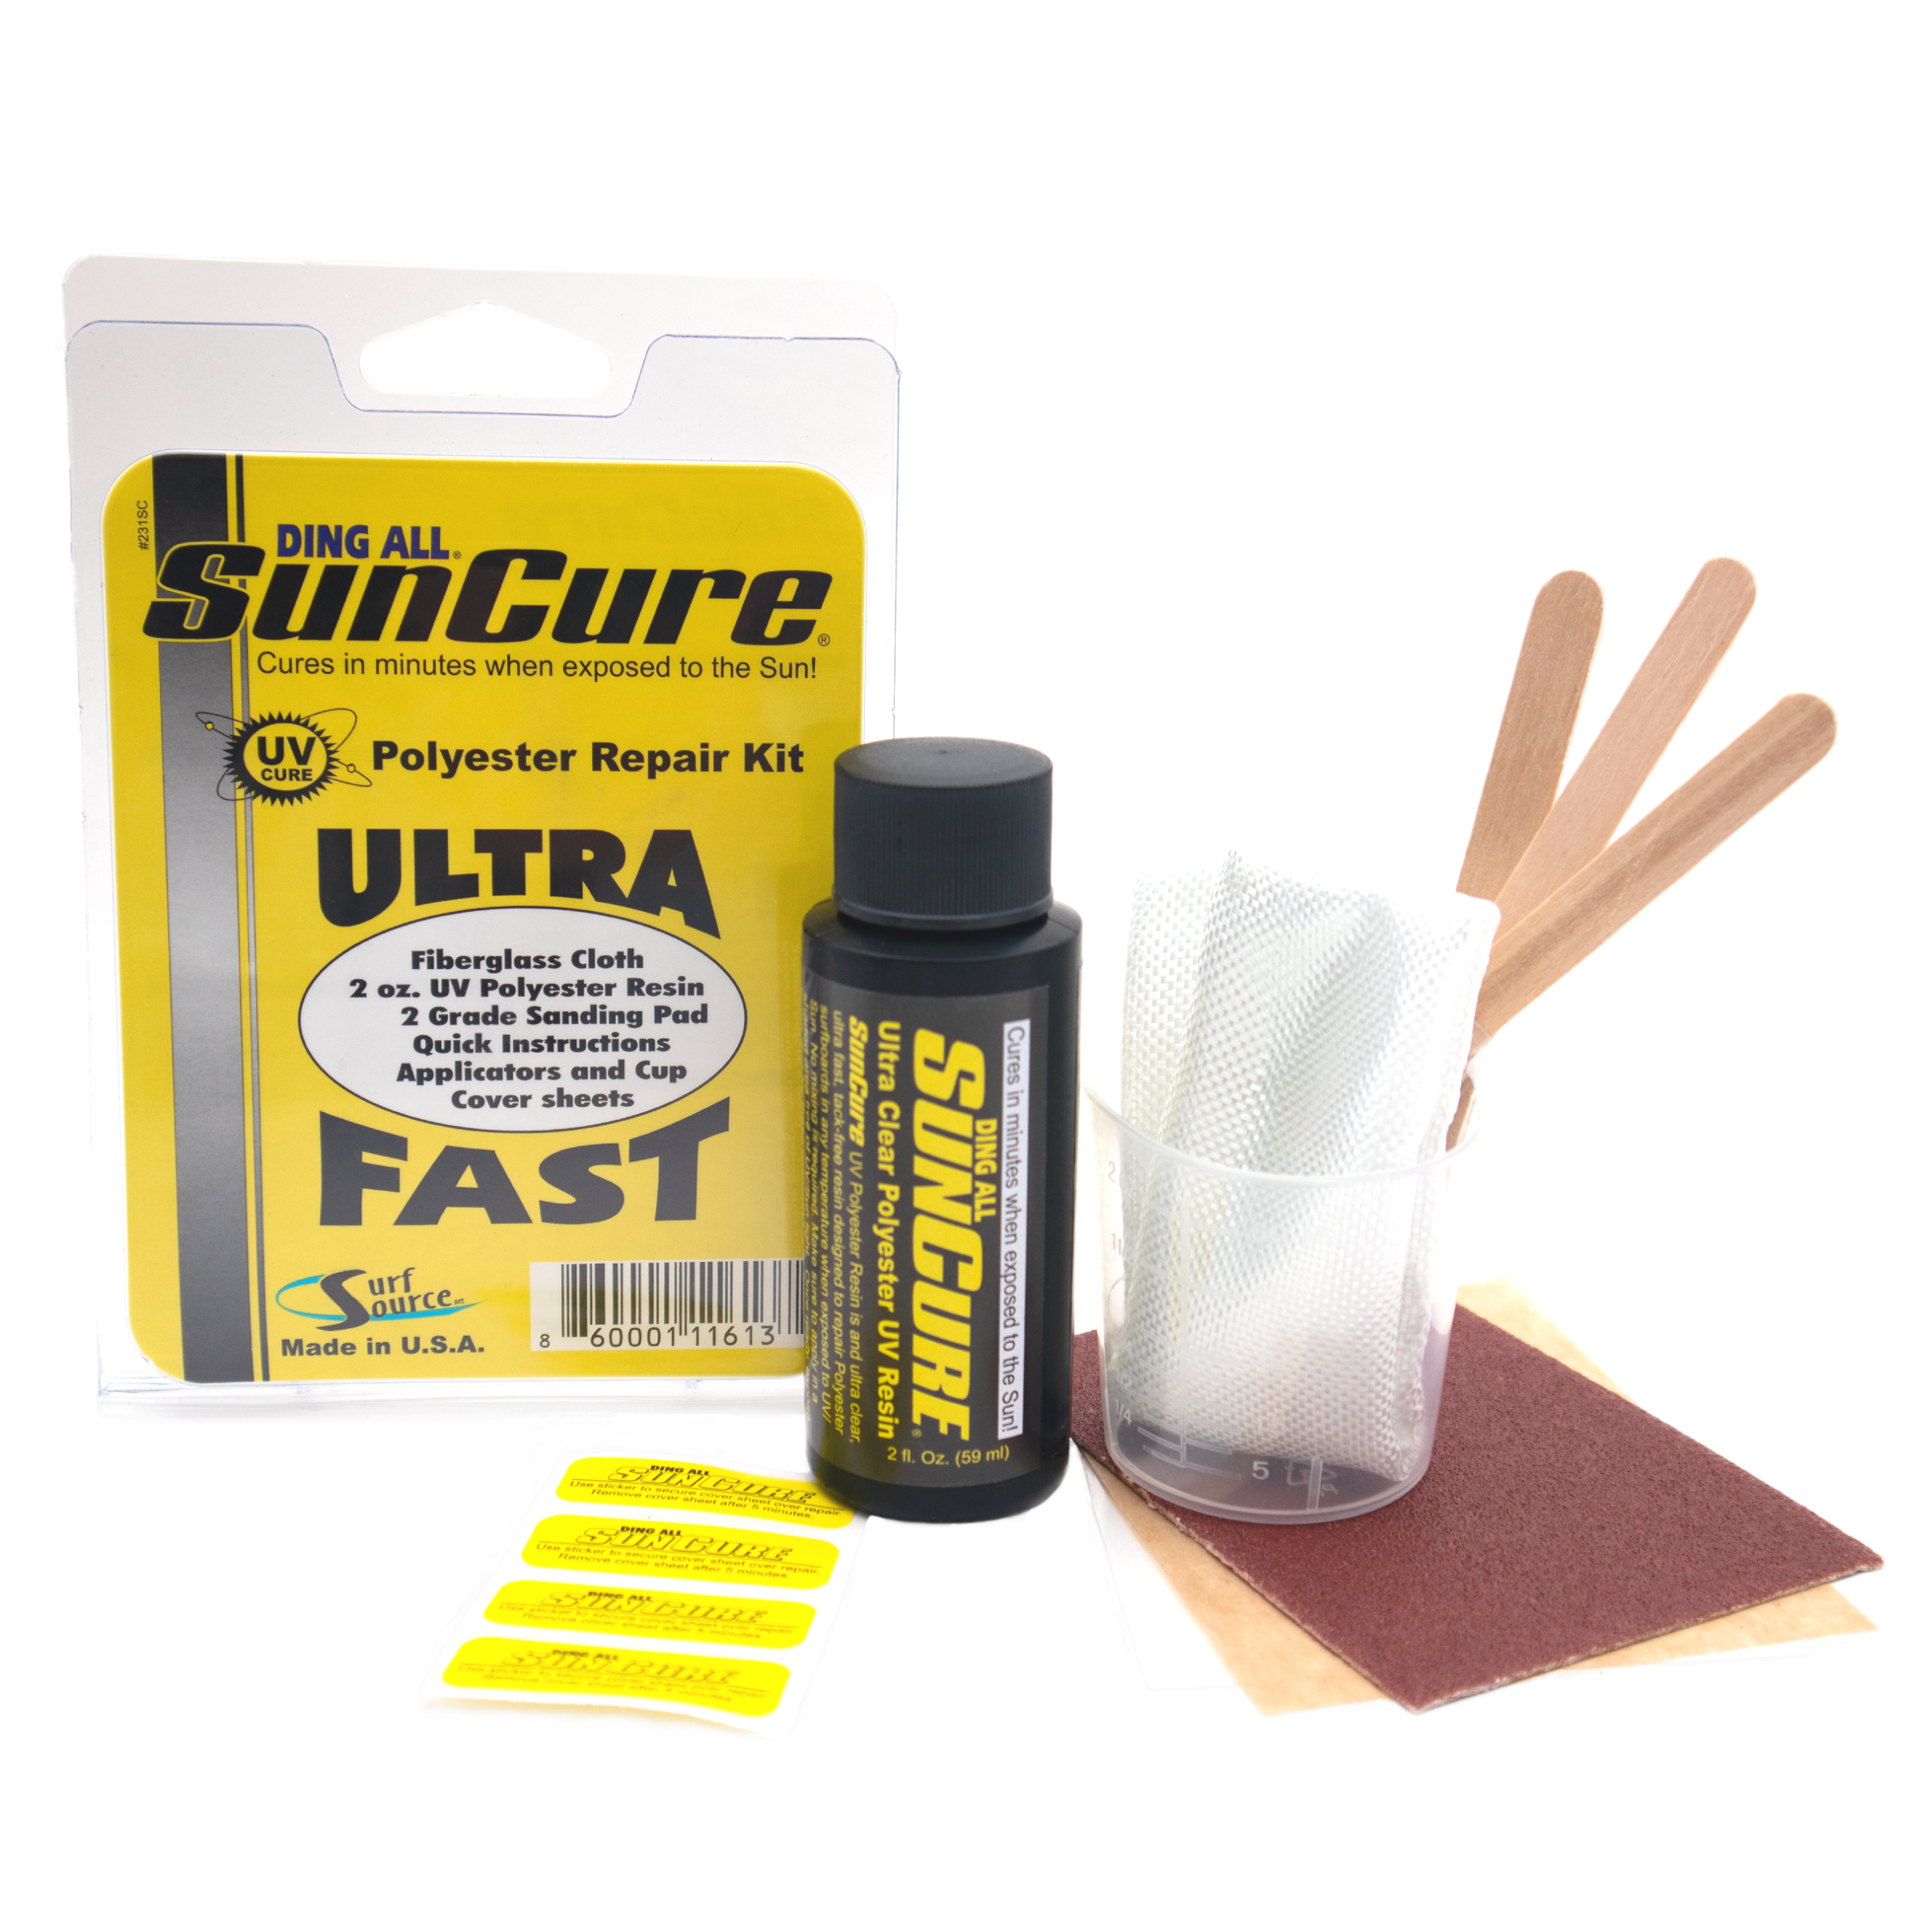 SunPowered Dura Resin Combo W/UV Light - Ding Repair Kits and Ding